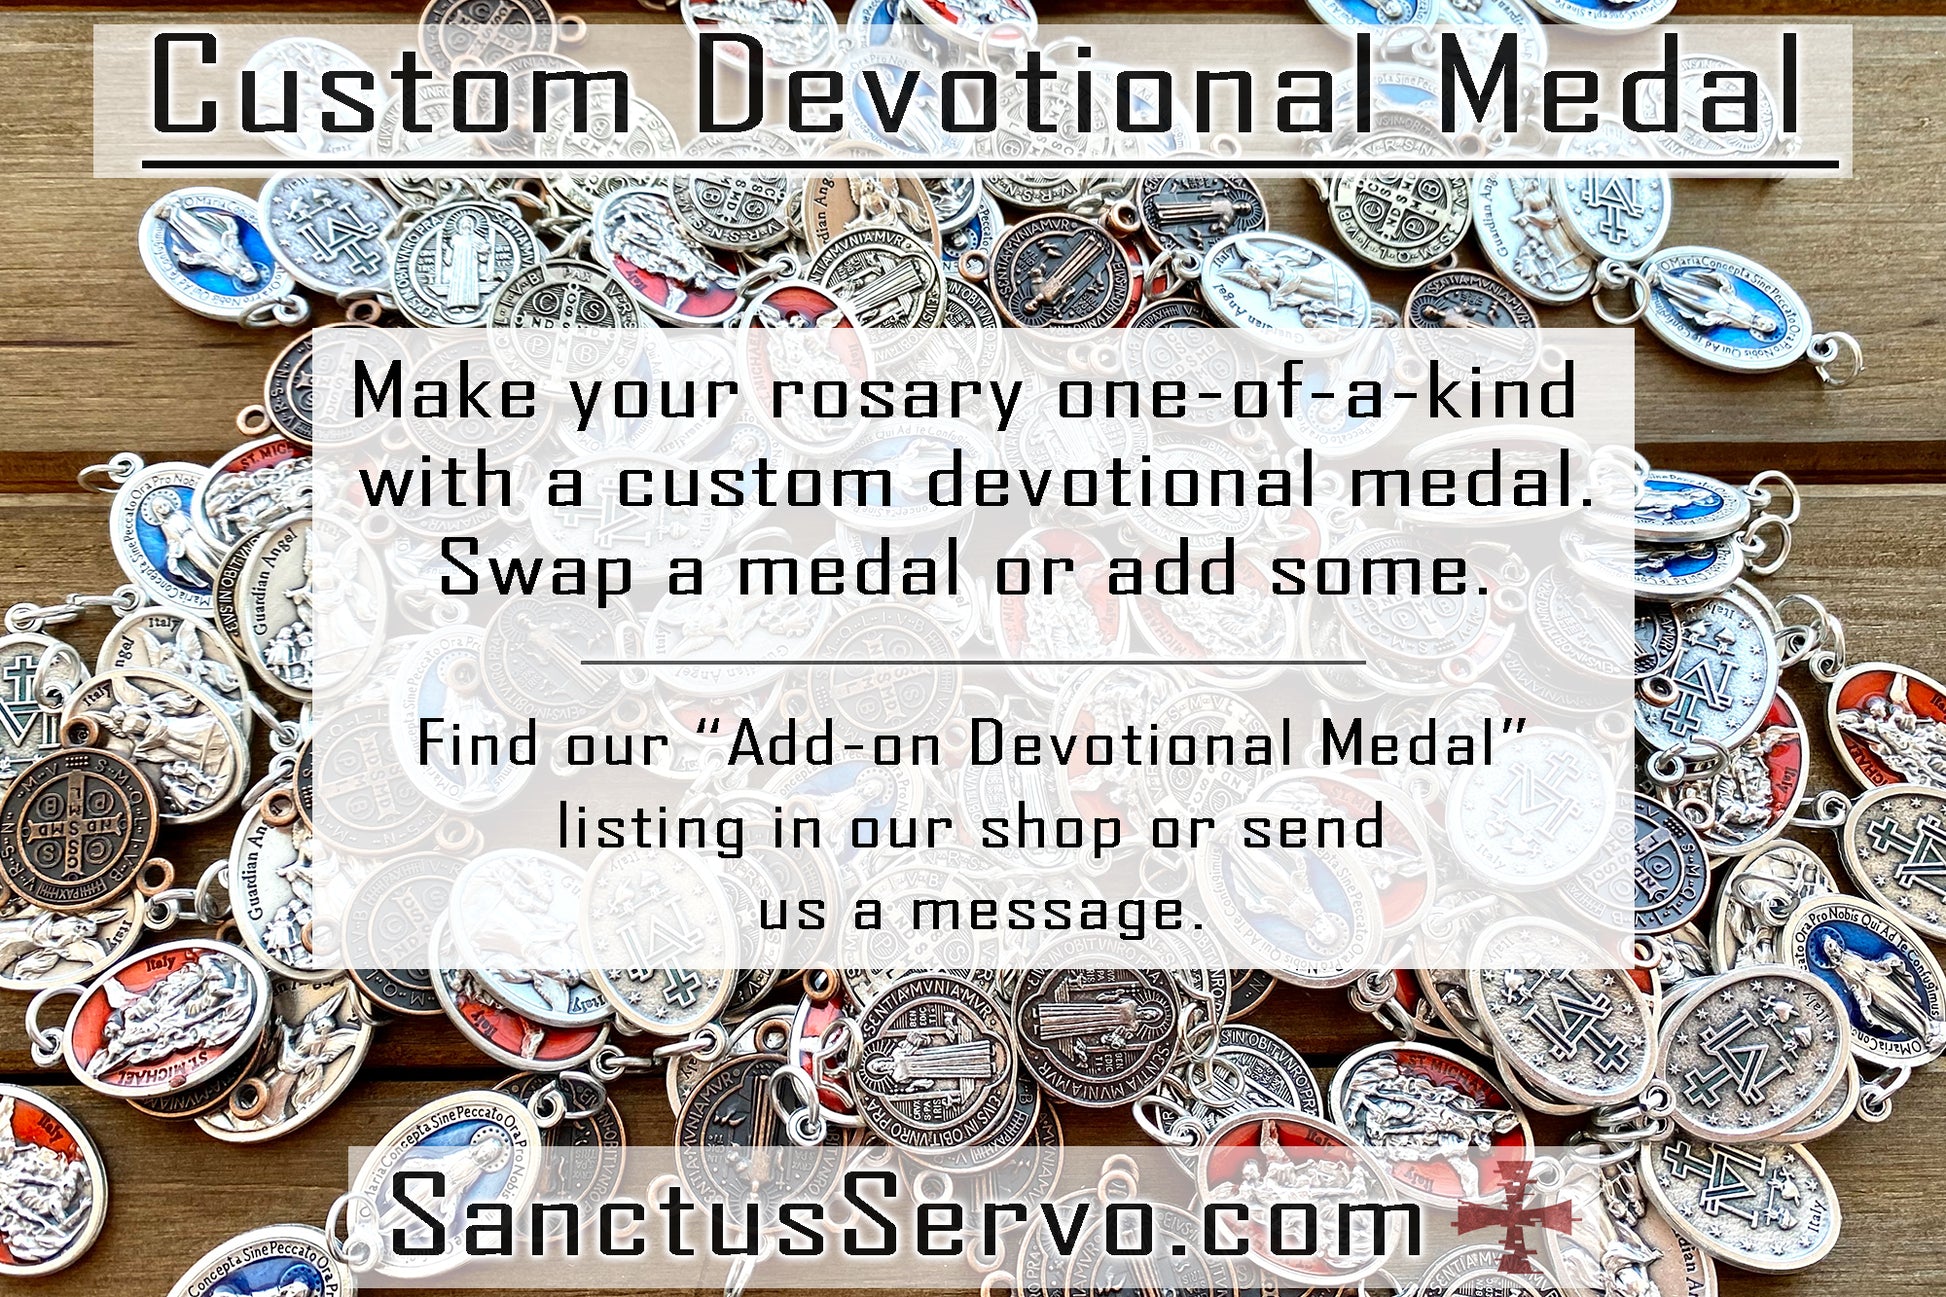 A custom devotional medal can be purchased and added to any rosary purchased from Sanctus Servo Rosaries.